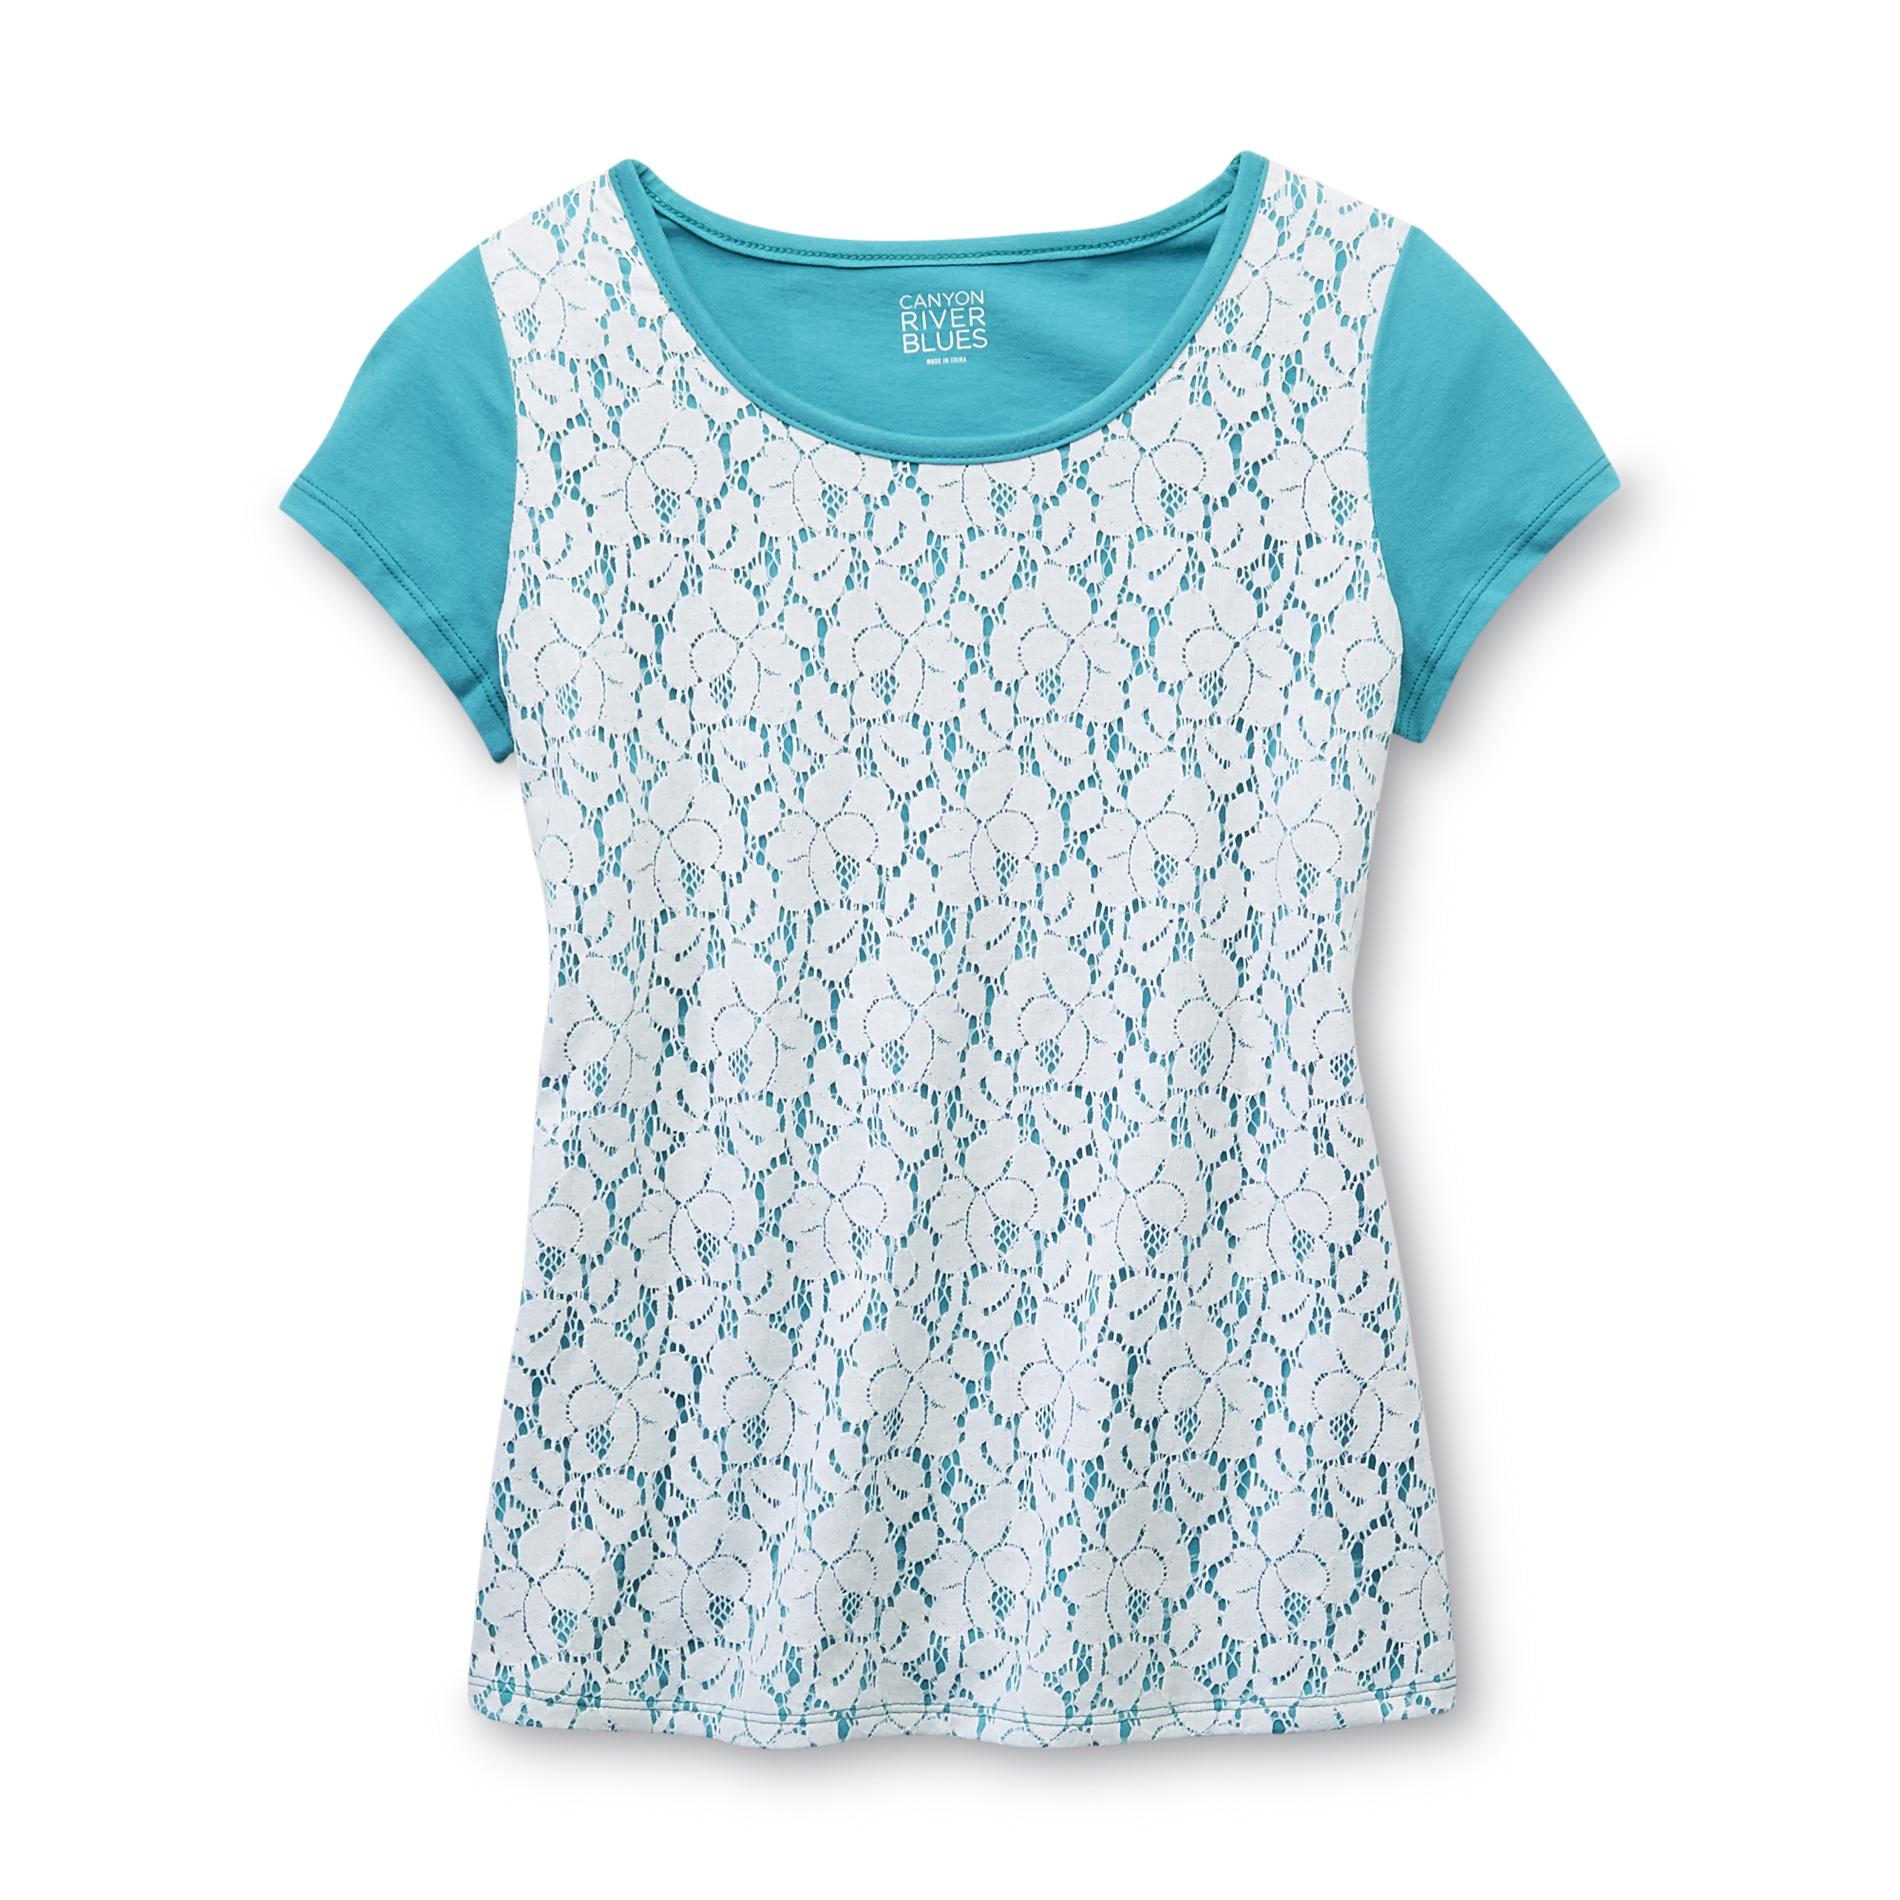 Canyon River Blues Girl's Floral Lace T-Shirt